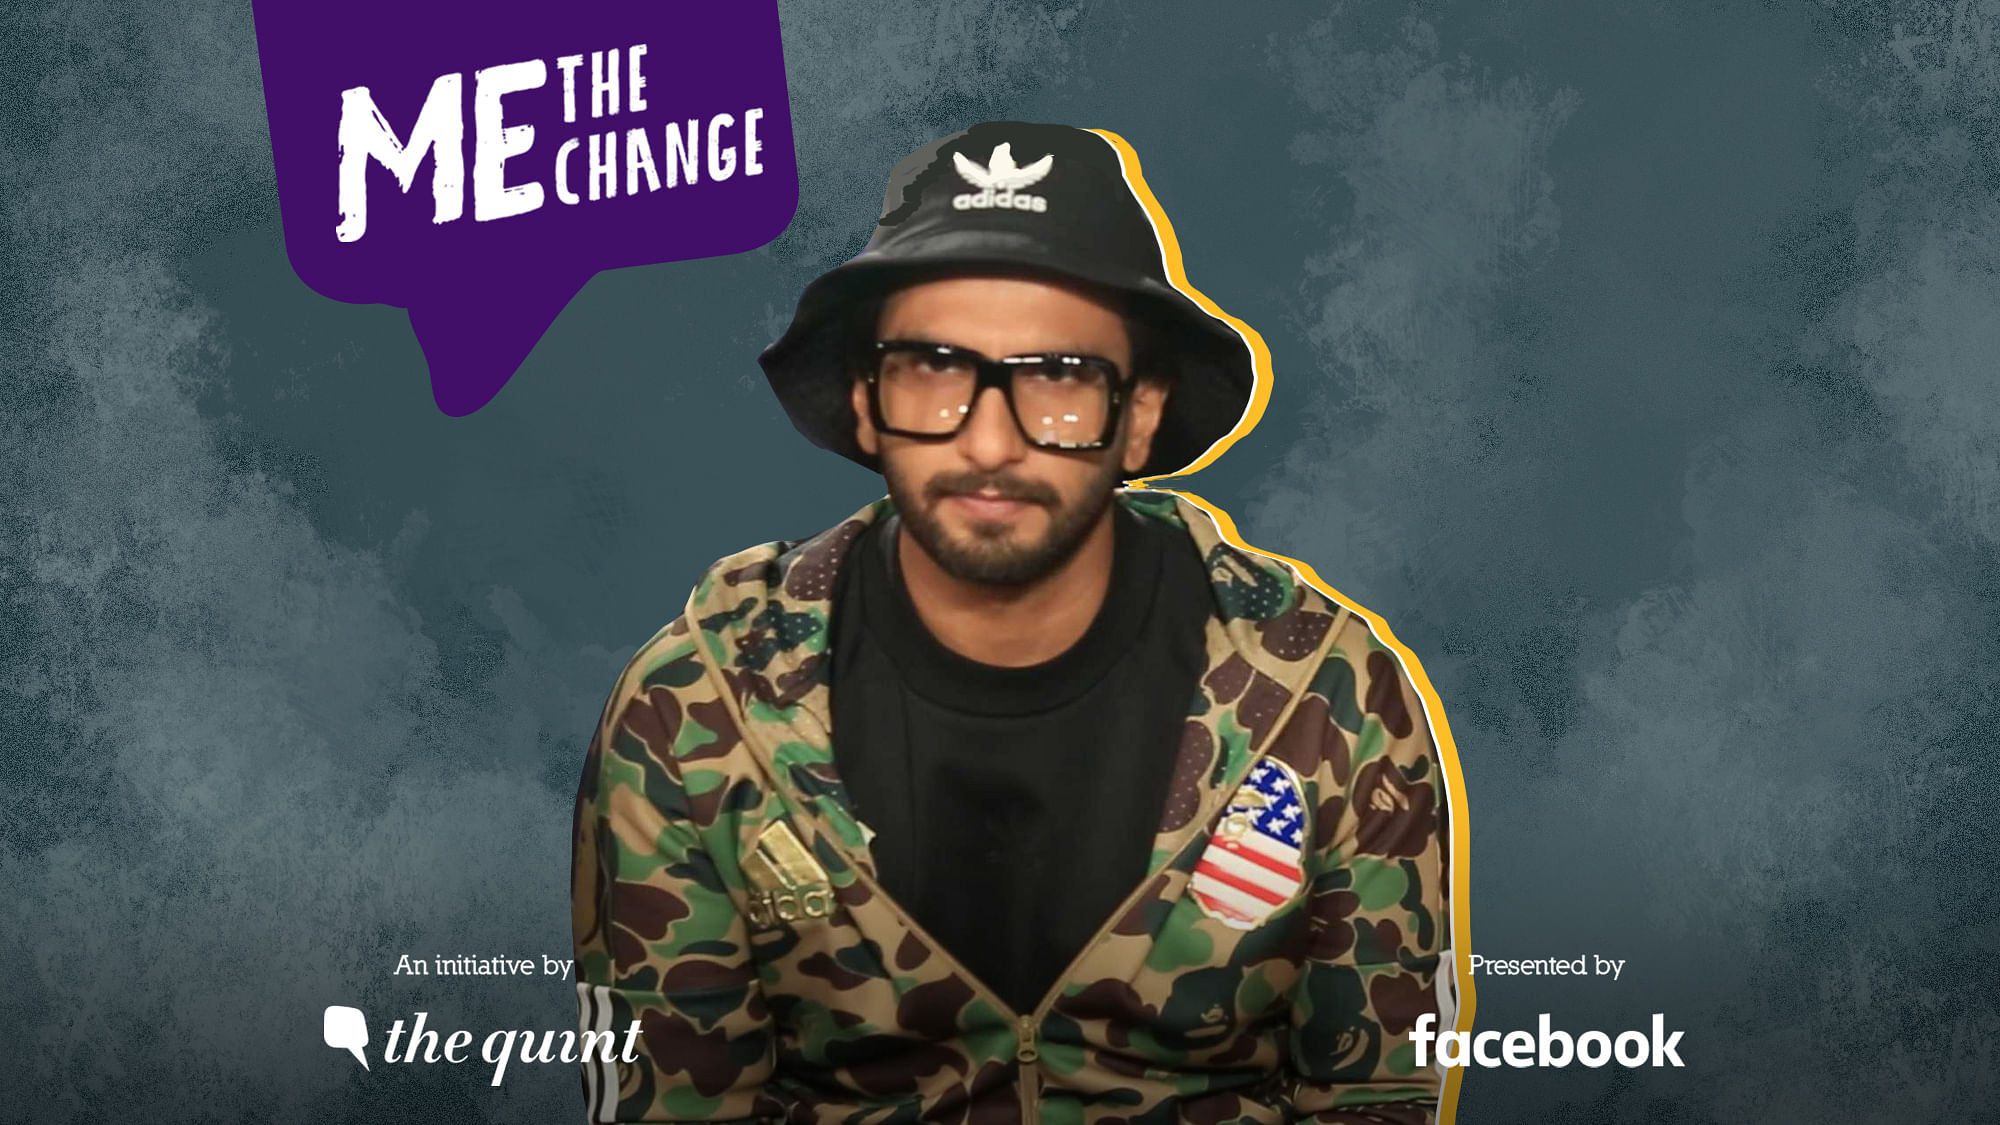 Ranveer Singh wants you to go and exercise the power of your vote!